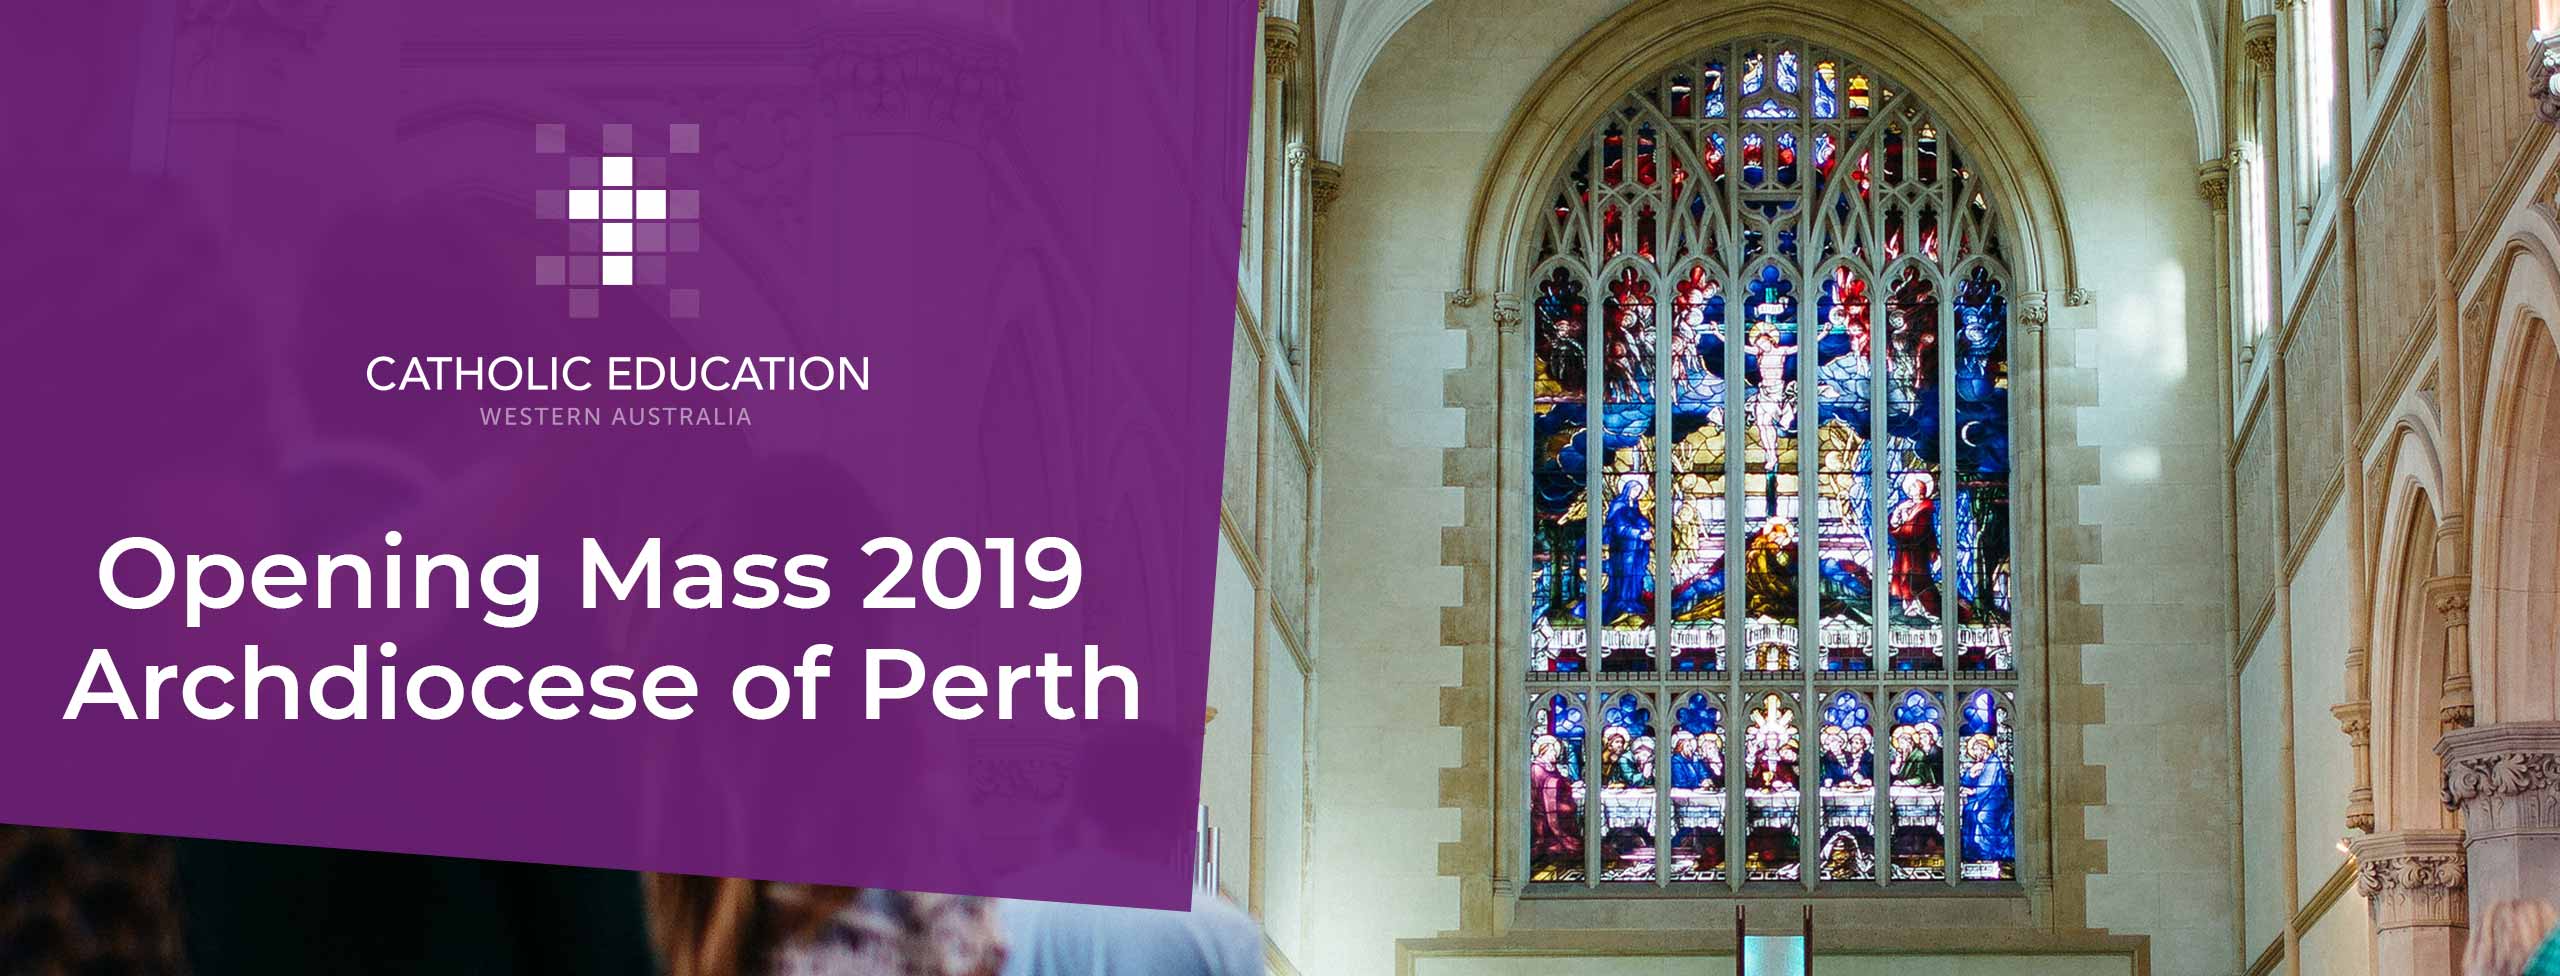 Opening Mass 2019 Archdiocese of Perth